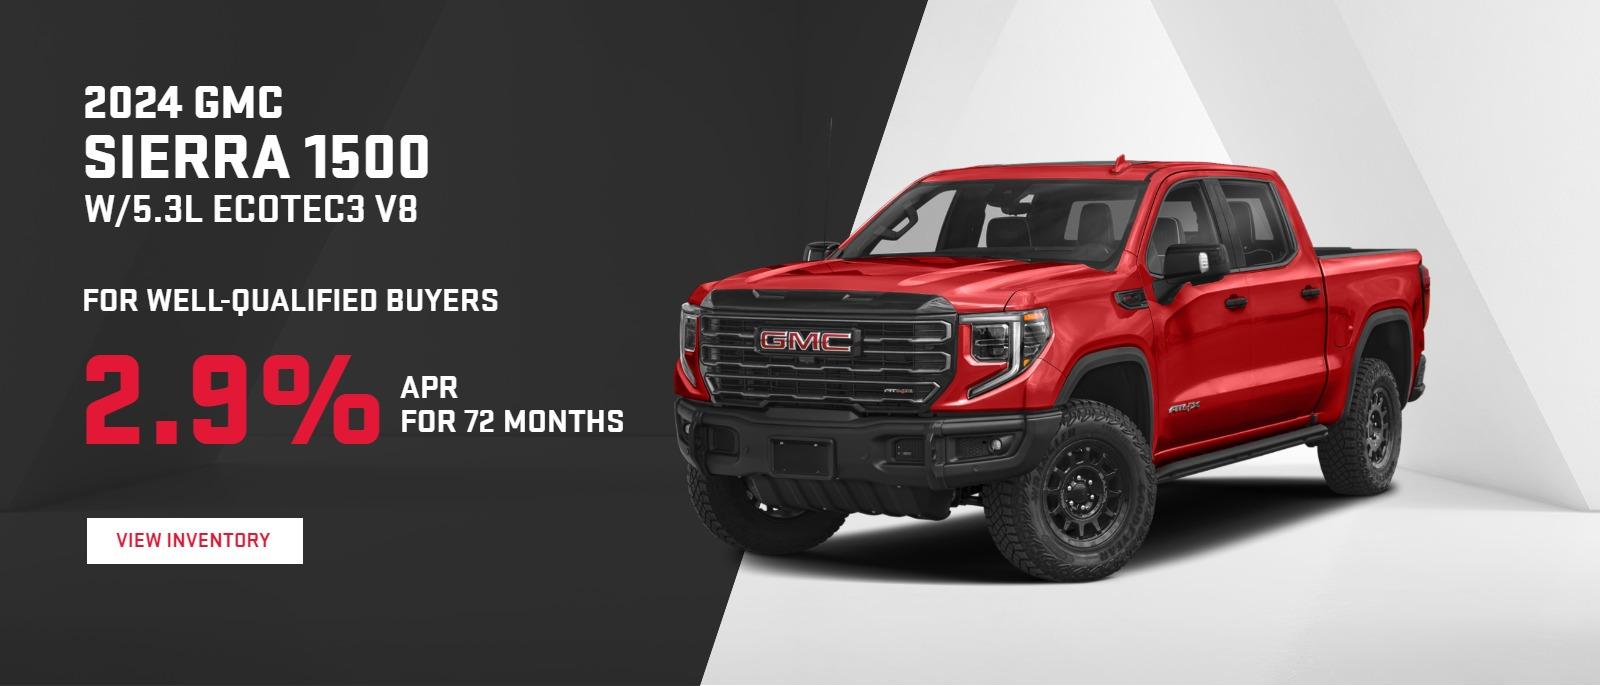 2024 GMC SIERRA 1500 W/5.3L ECOTEC3 V8

For Well-Qualified Buyers
2.9% APR for 72 months